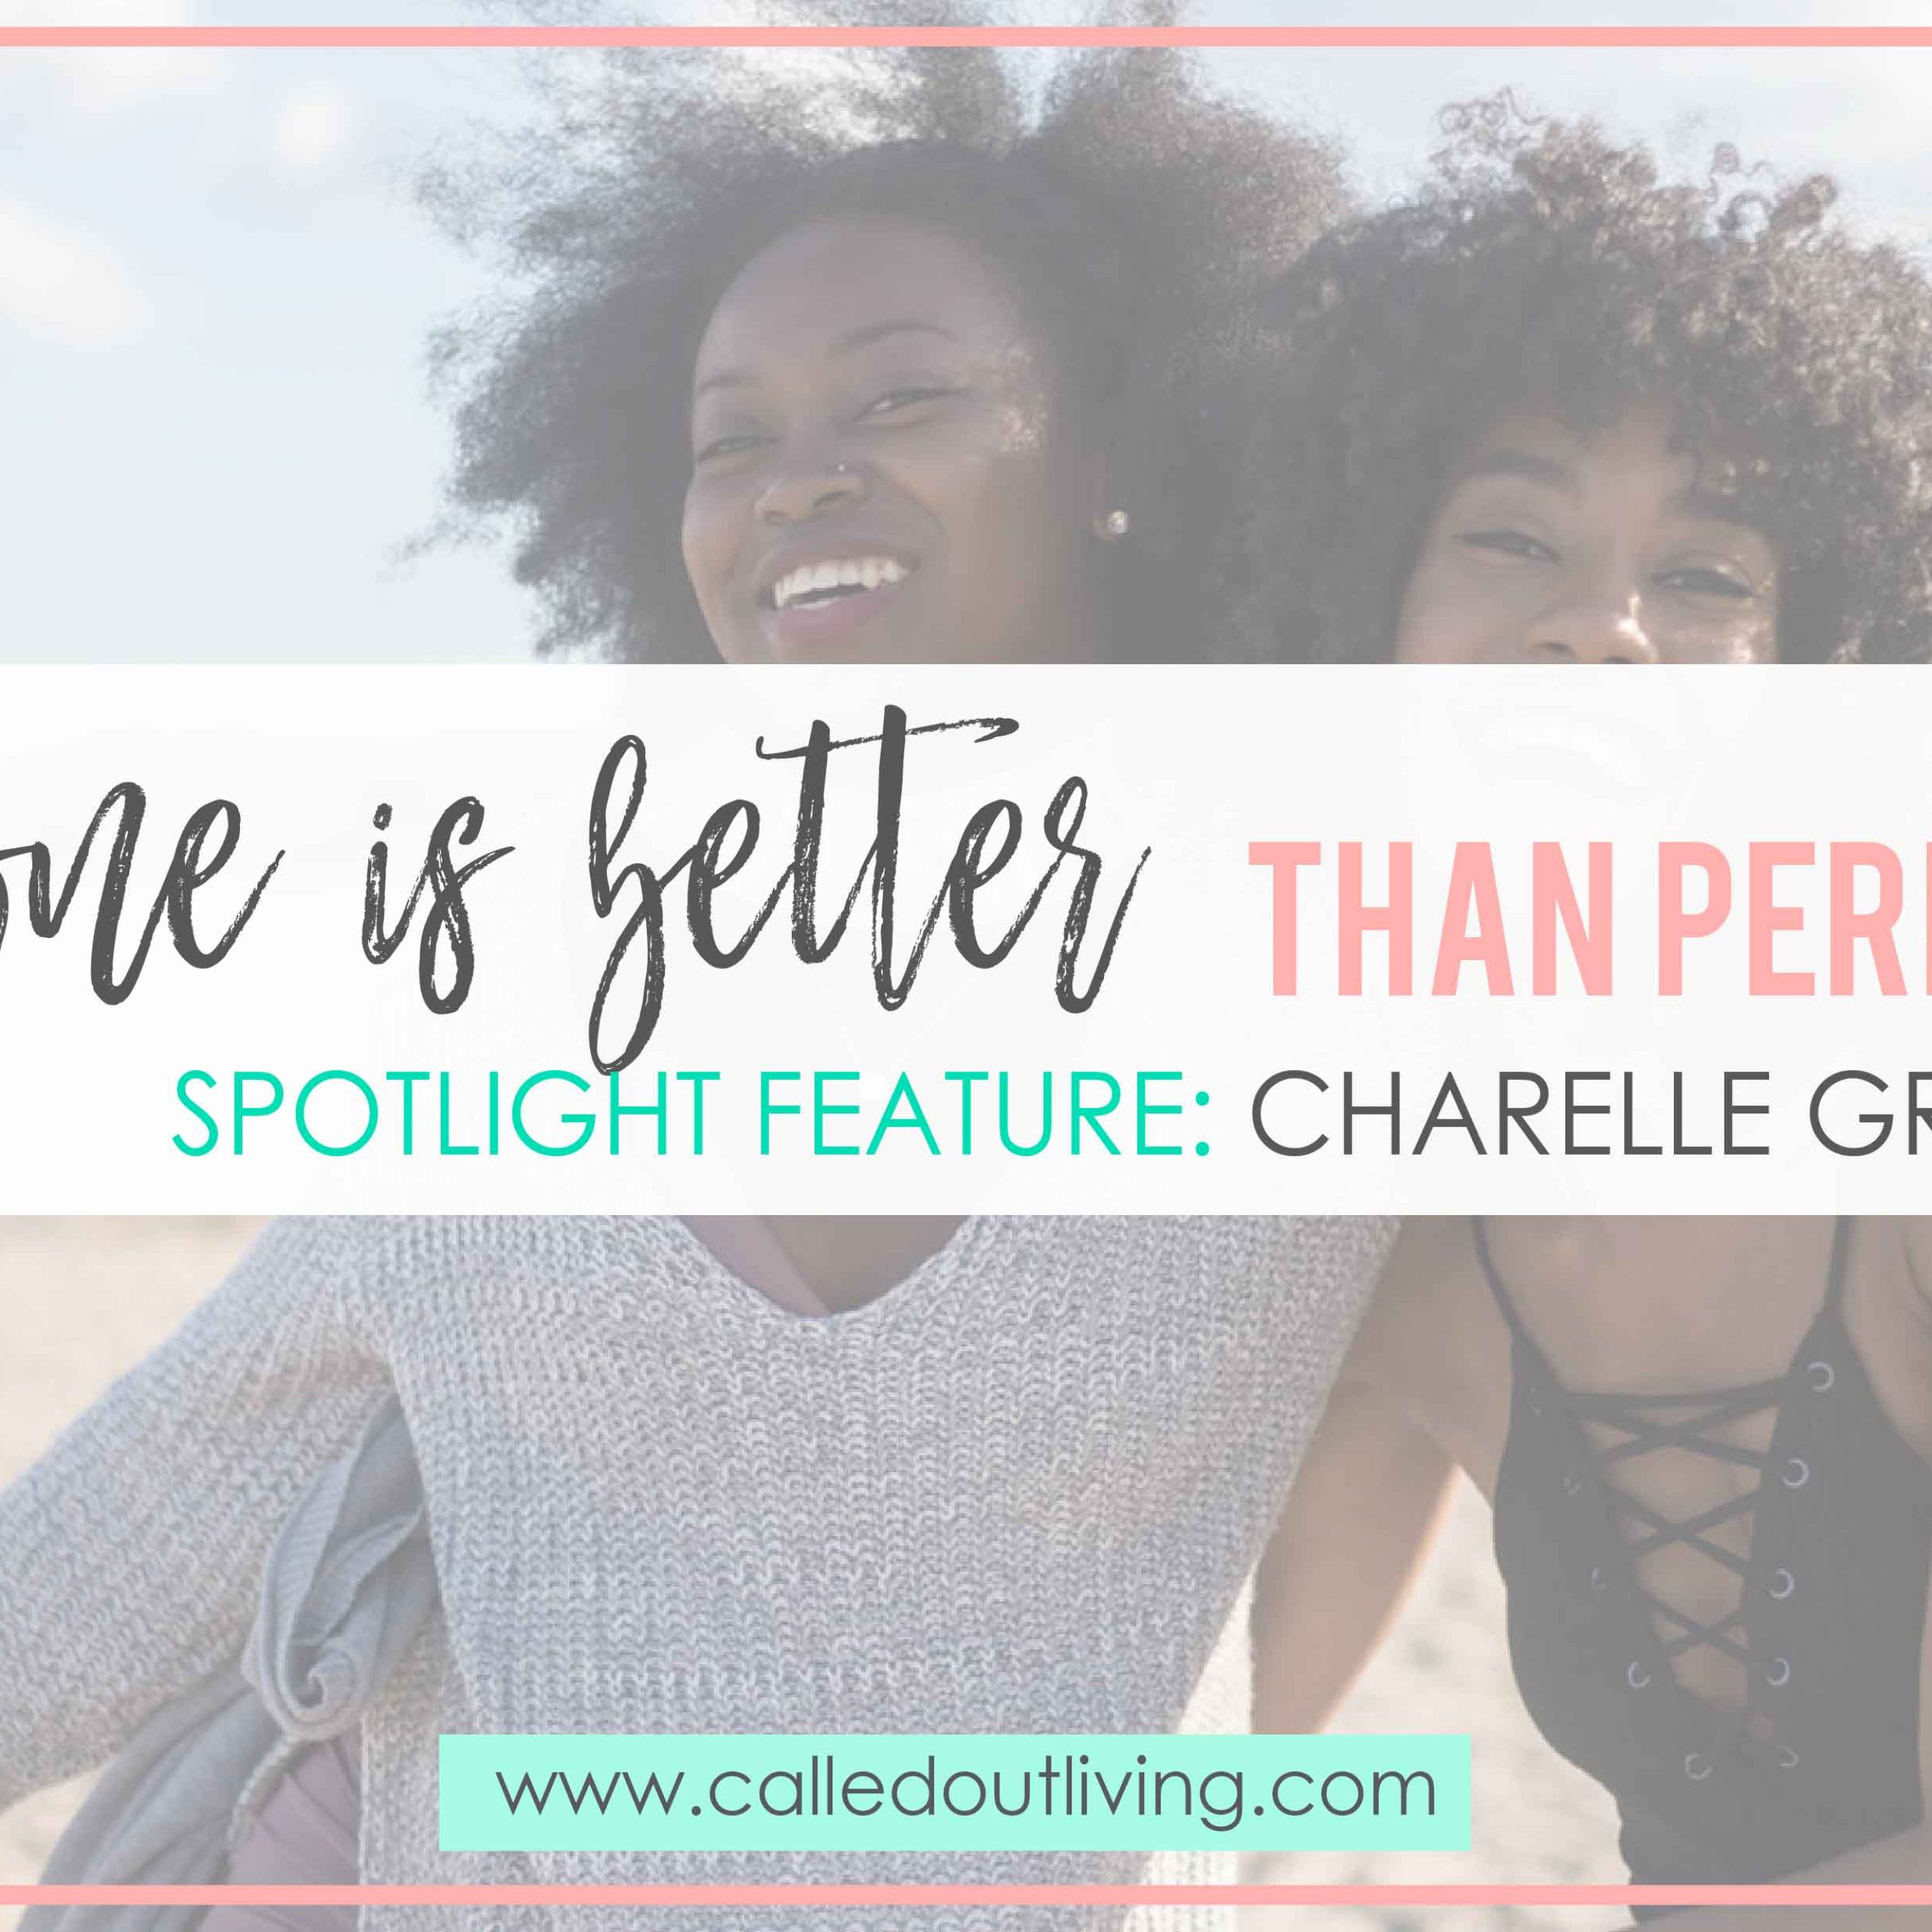 done is better than perfection, Charelle Griffiths female entrepreneur shares her story on overcoming limiting beliefs, how important mindset is, using habits and goal setting #femaleentrepreneur #mindset #habits #success